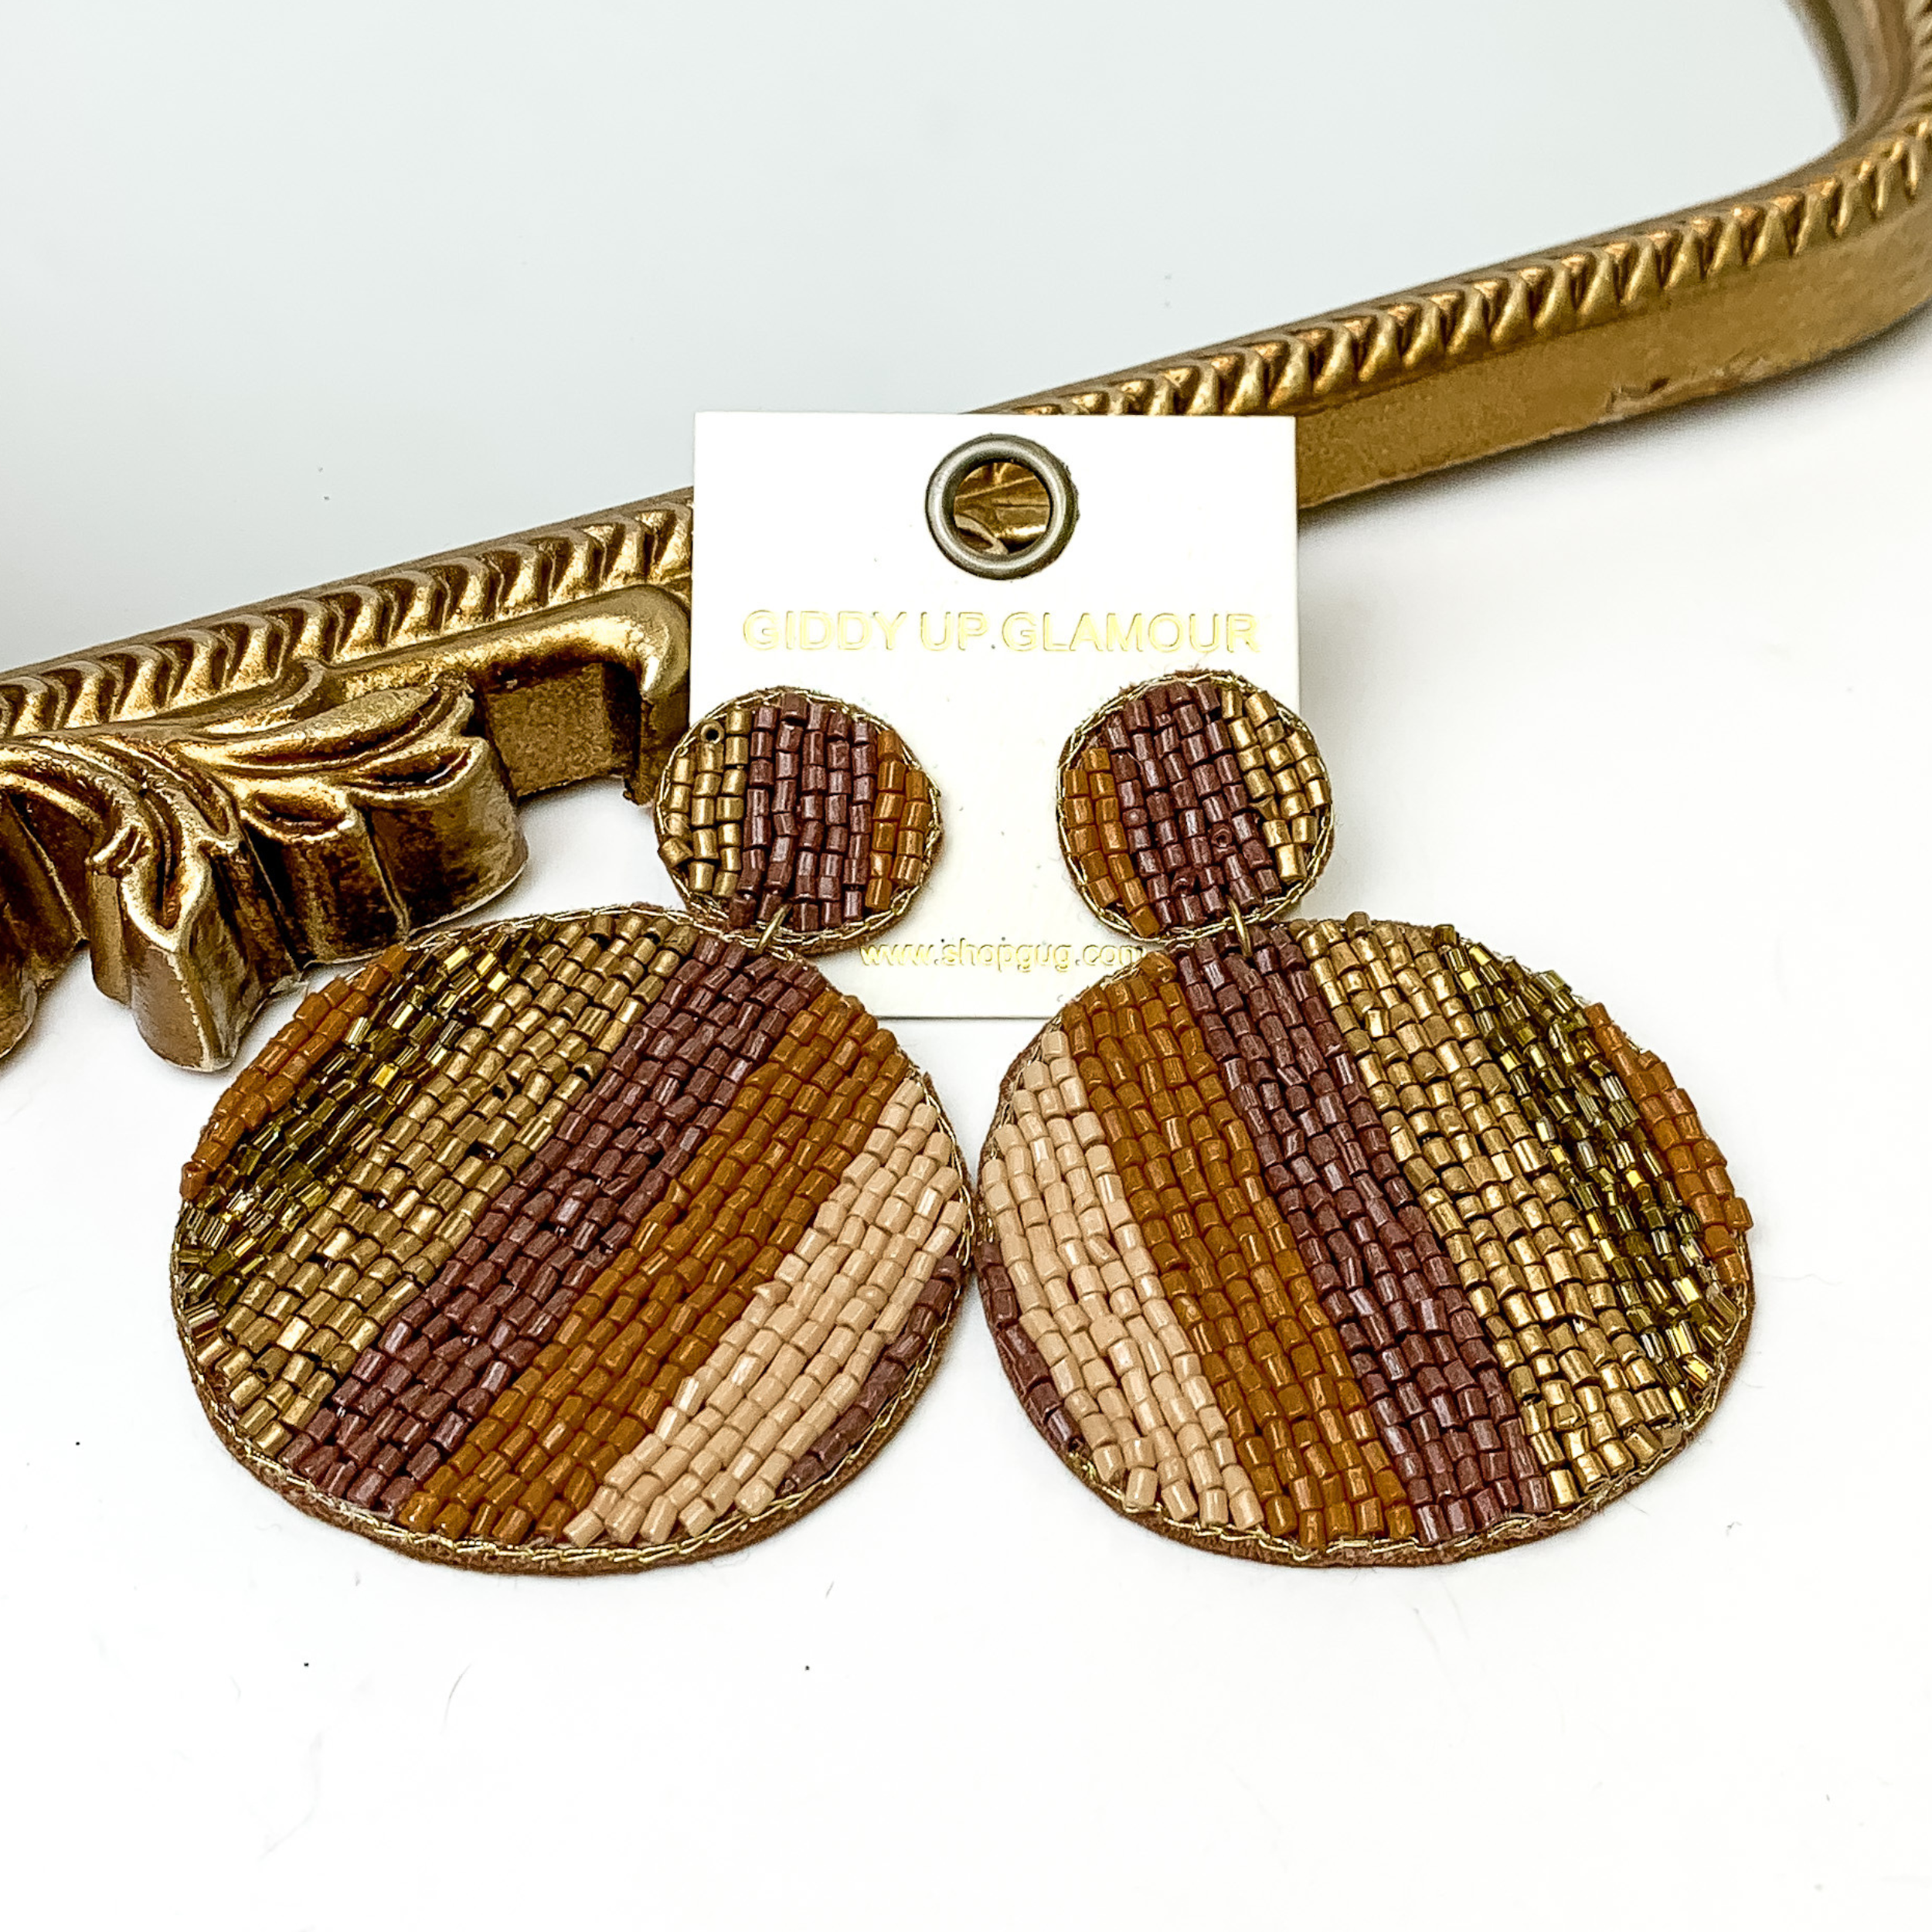 Pictured is a pair of beaded circle drop earrings in a stripe pattern. These earrings include multi colors of brown. These earrings are pictured in a white background with a gold mirror.